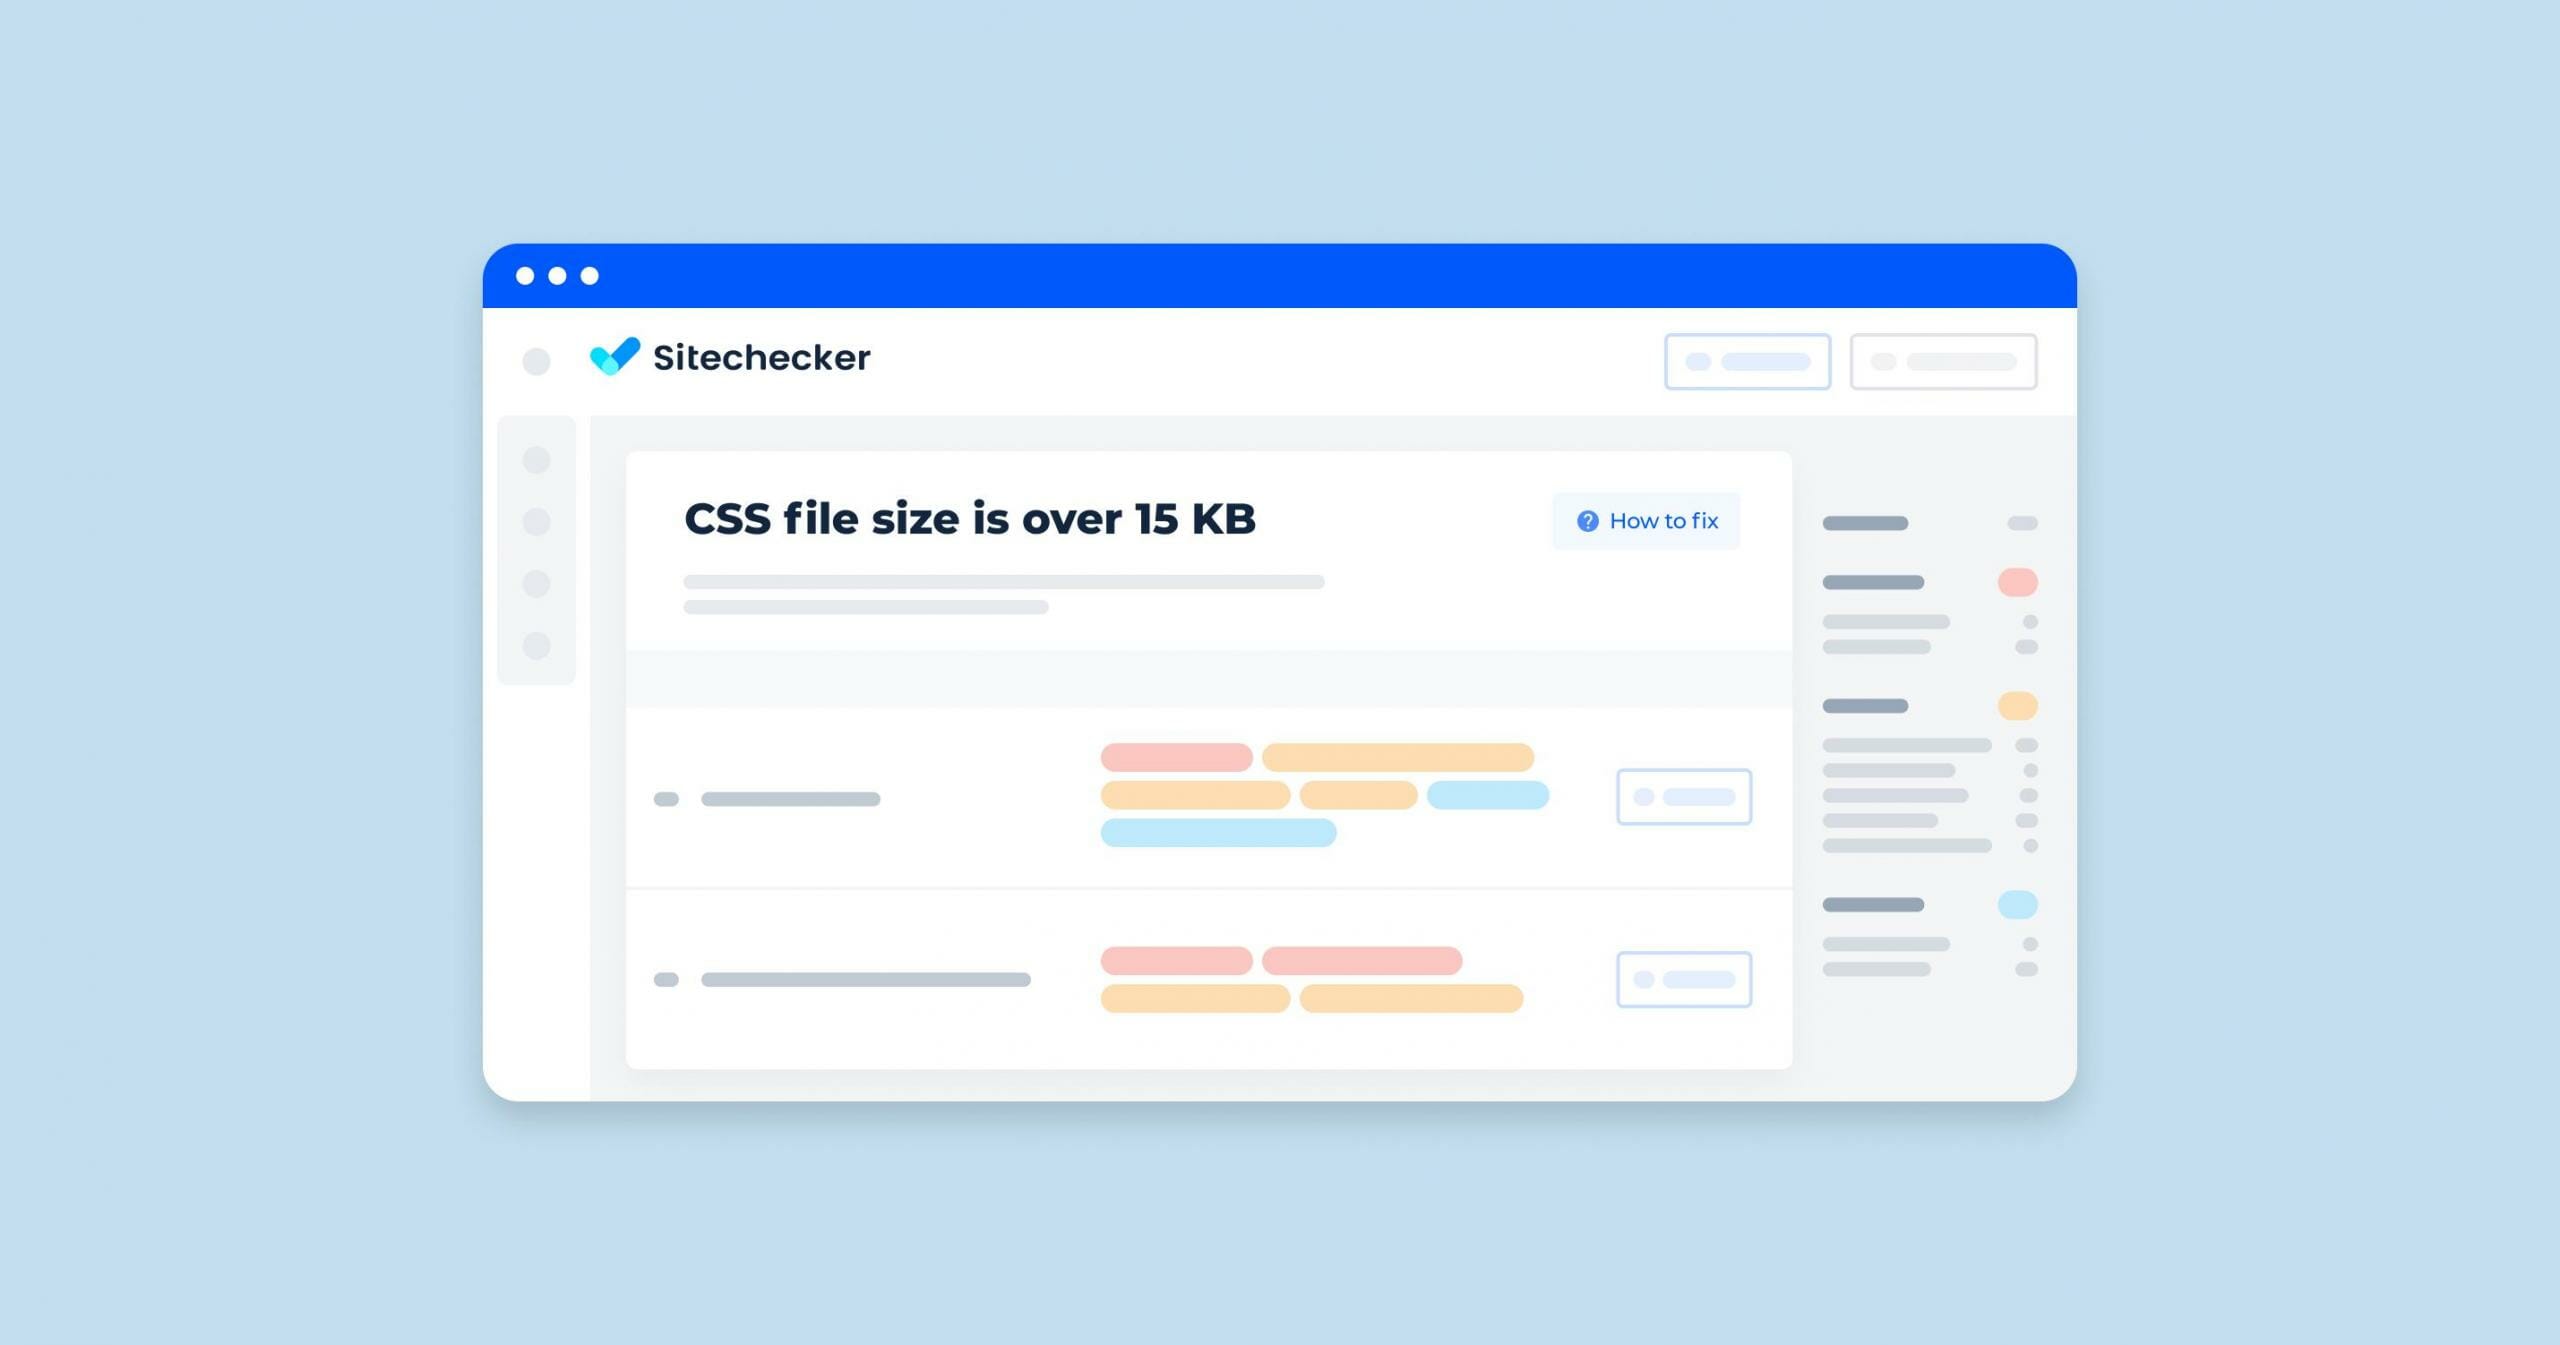 How to Fix the Issue When CSS File Size is Over 15 KB